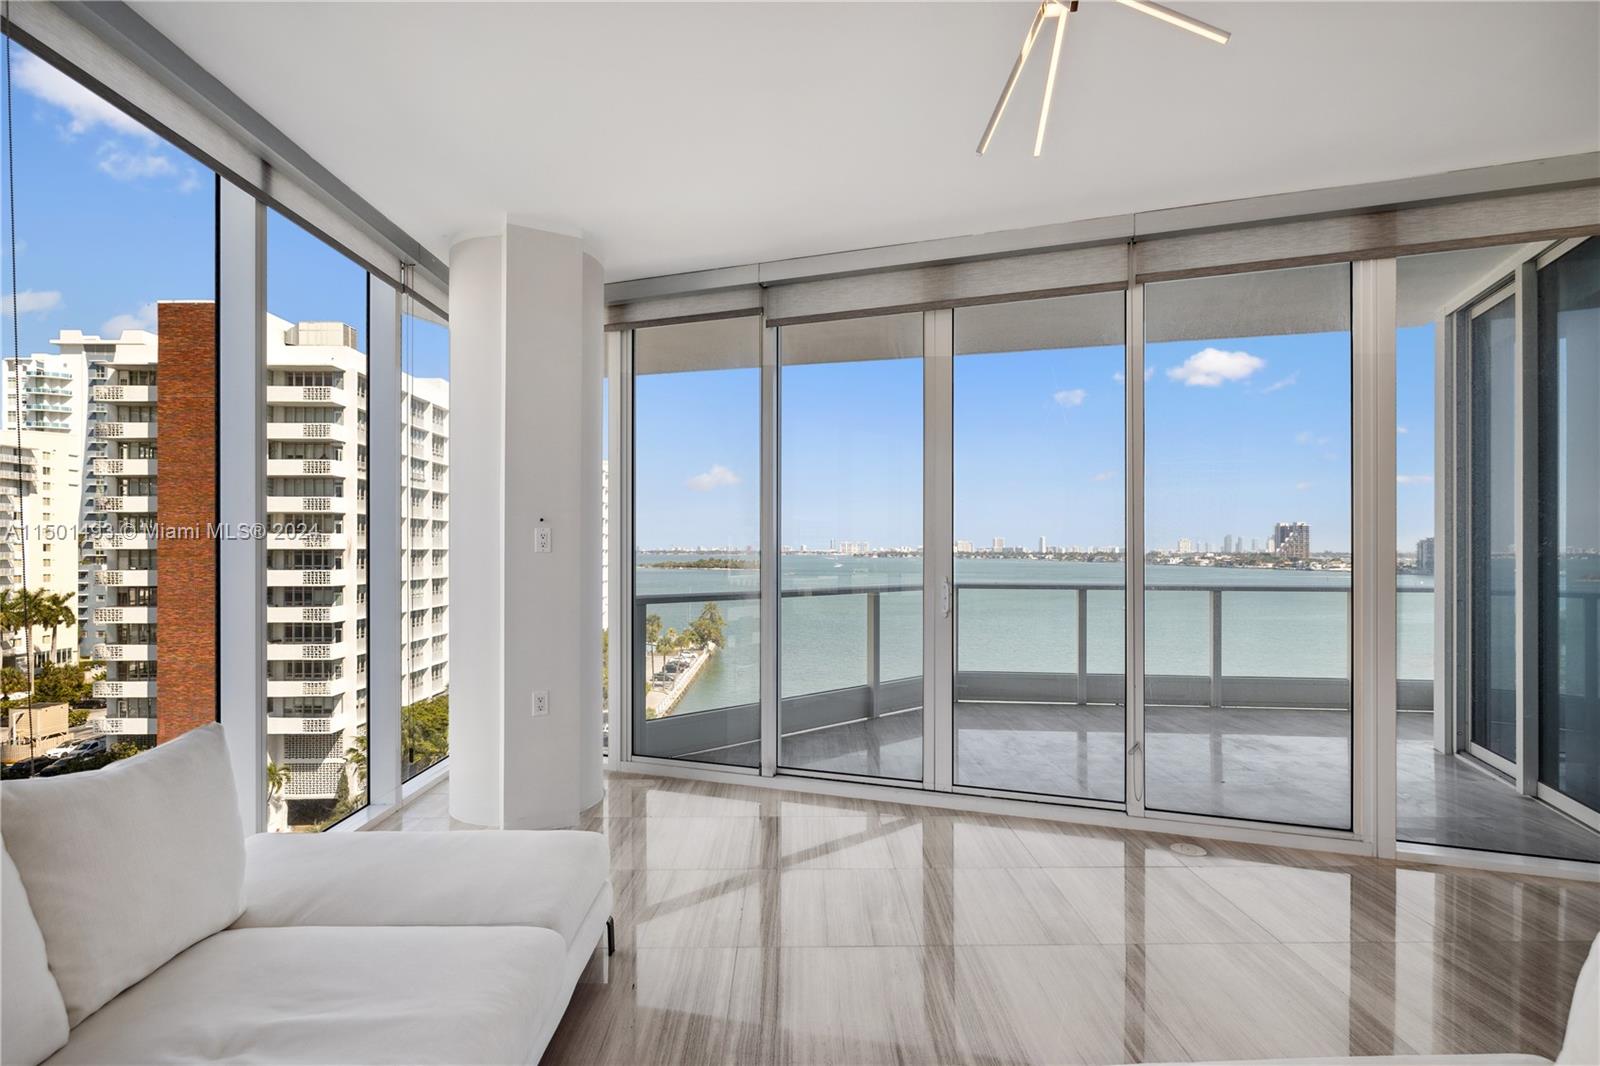 Experience opulent living at the prestigious Paramount Bay, widely recognized as Edgewater's pinnacle of luxury and prime location. This striking two-bedroom, two-and-a-half-bathroom condominium boasts floor-to-ceiling windows that offer unmatched vistas of Biscayne Bay, Miami Beach, and the Ocean. Notable features include an expansive balcony, an elegant primary suite with a spa-like bathroom and walk-in closet, top-of-the-line appliances, and a private elevator for exclusive access to your foyer. Paramount Bay's lavish amenities, crafted by Lenny Kravitz, encompass two pools, cabanas, a BBQ area, a pilates room, designated spaces for kids and teens, a party room, a library, and a cutting-edge 5000 sq ft spa/fitness center. Embrace the epitome of waterfront living!